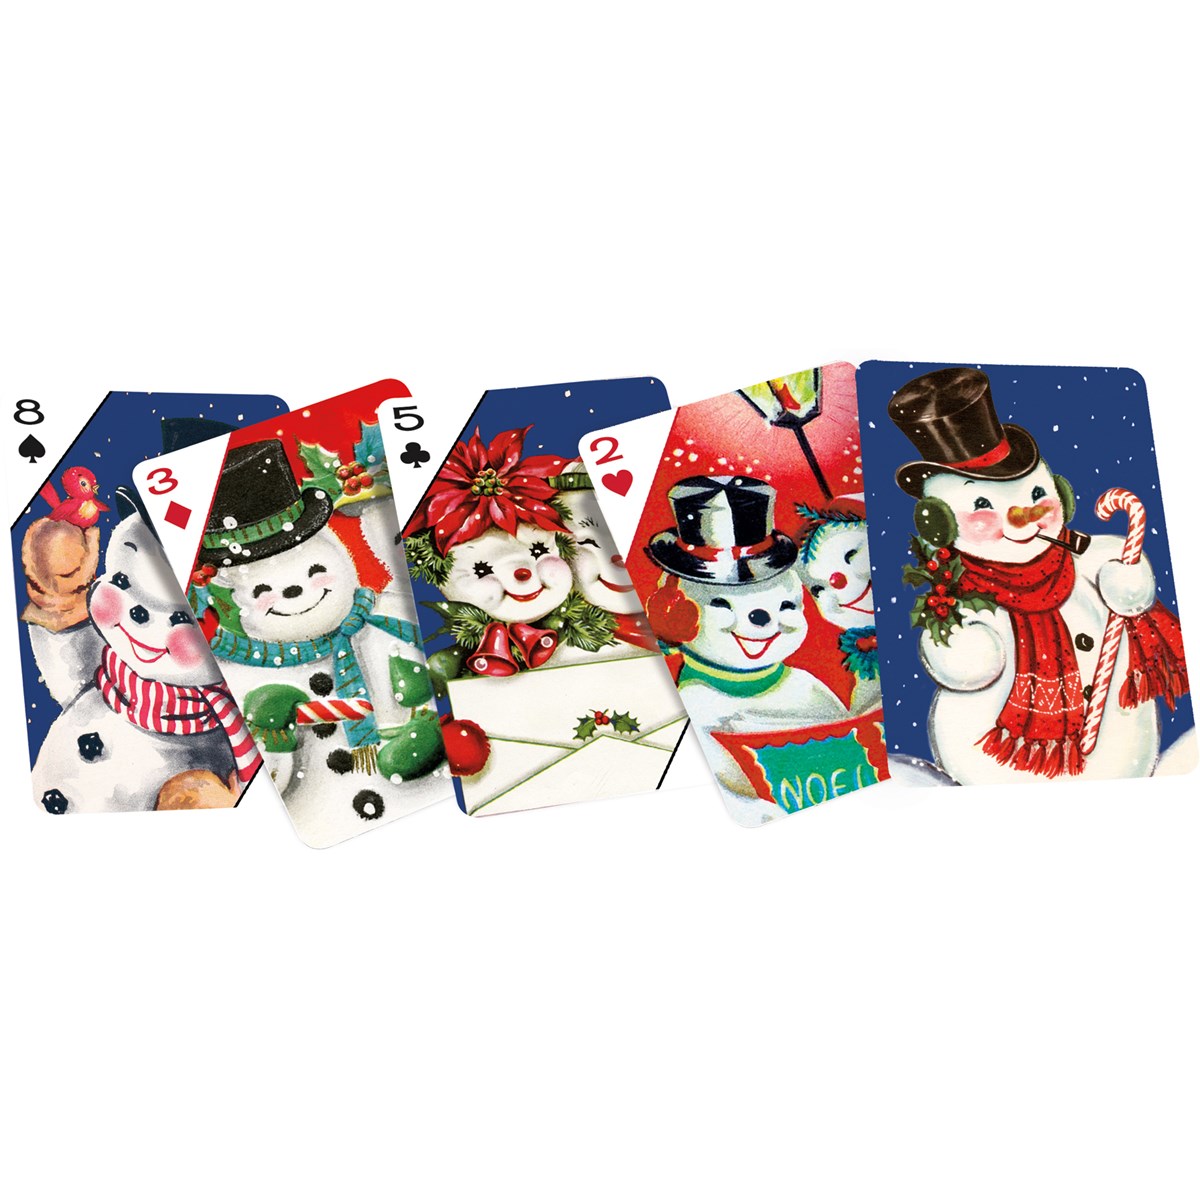 Snowman Playing Cards - Paper, Acrylic